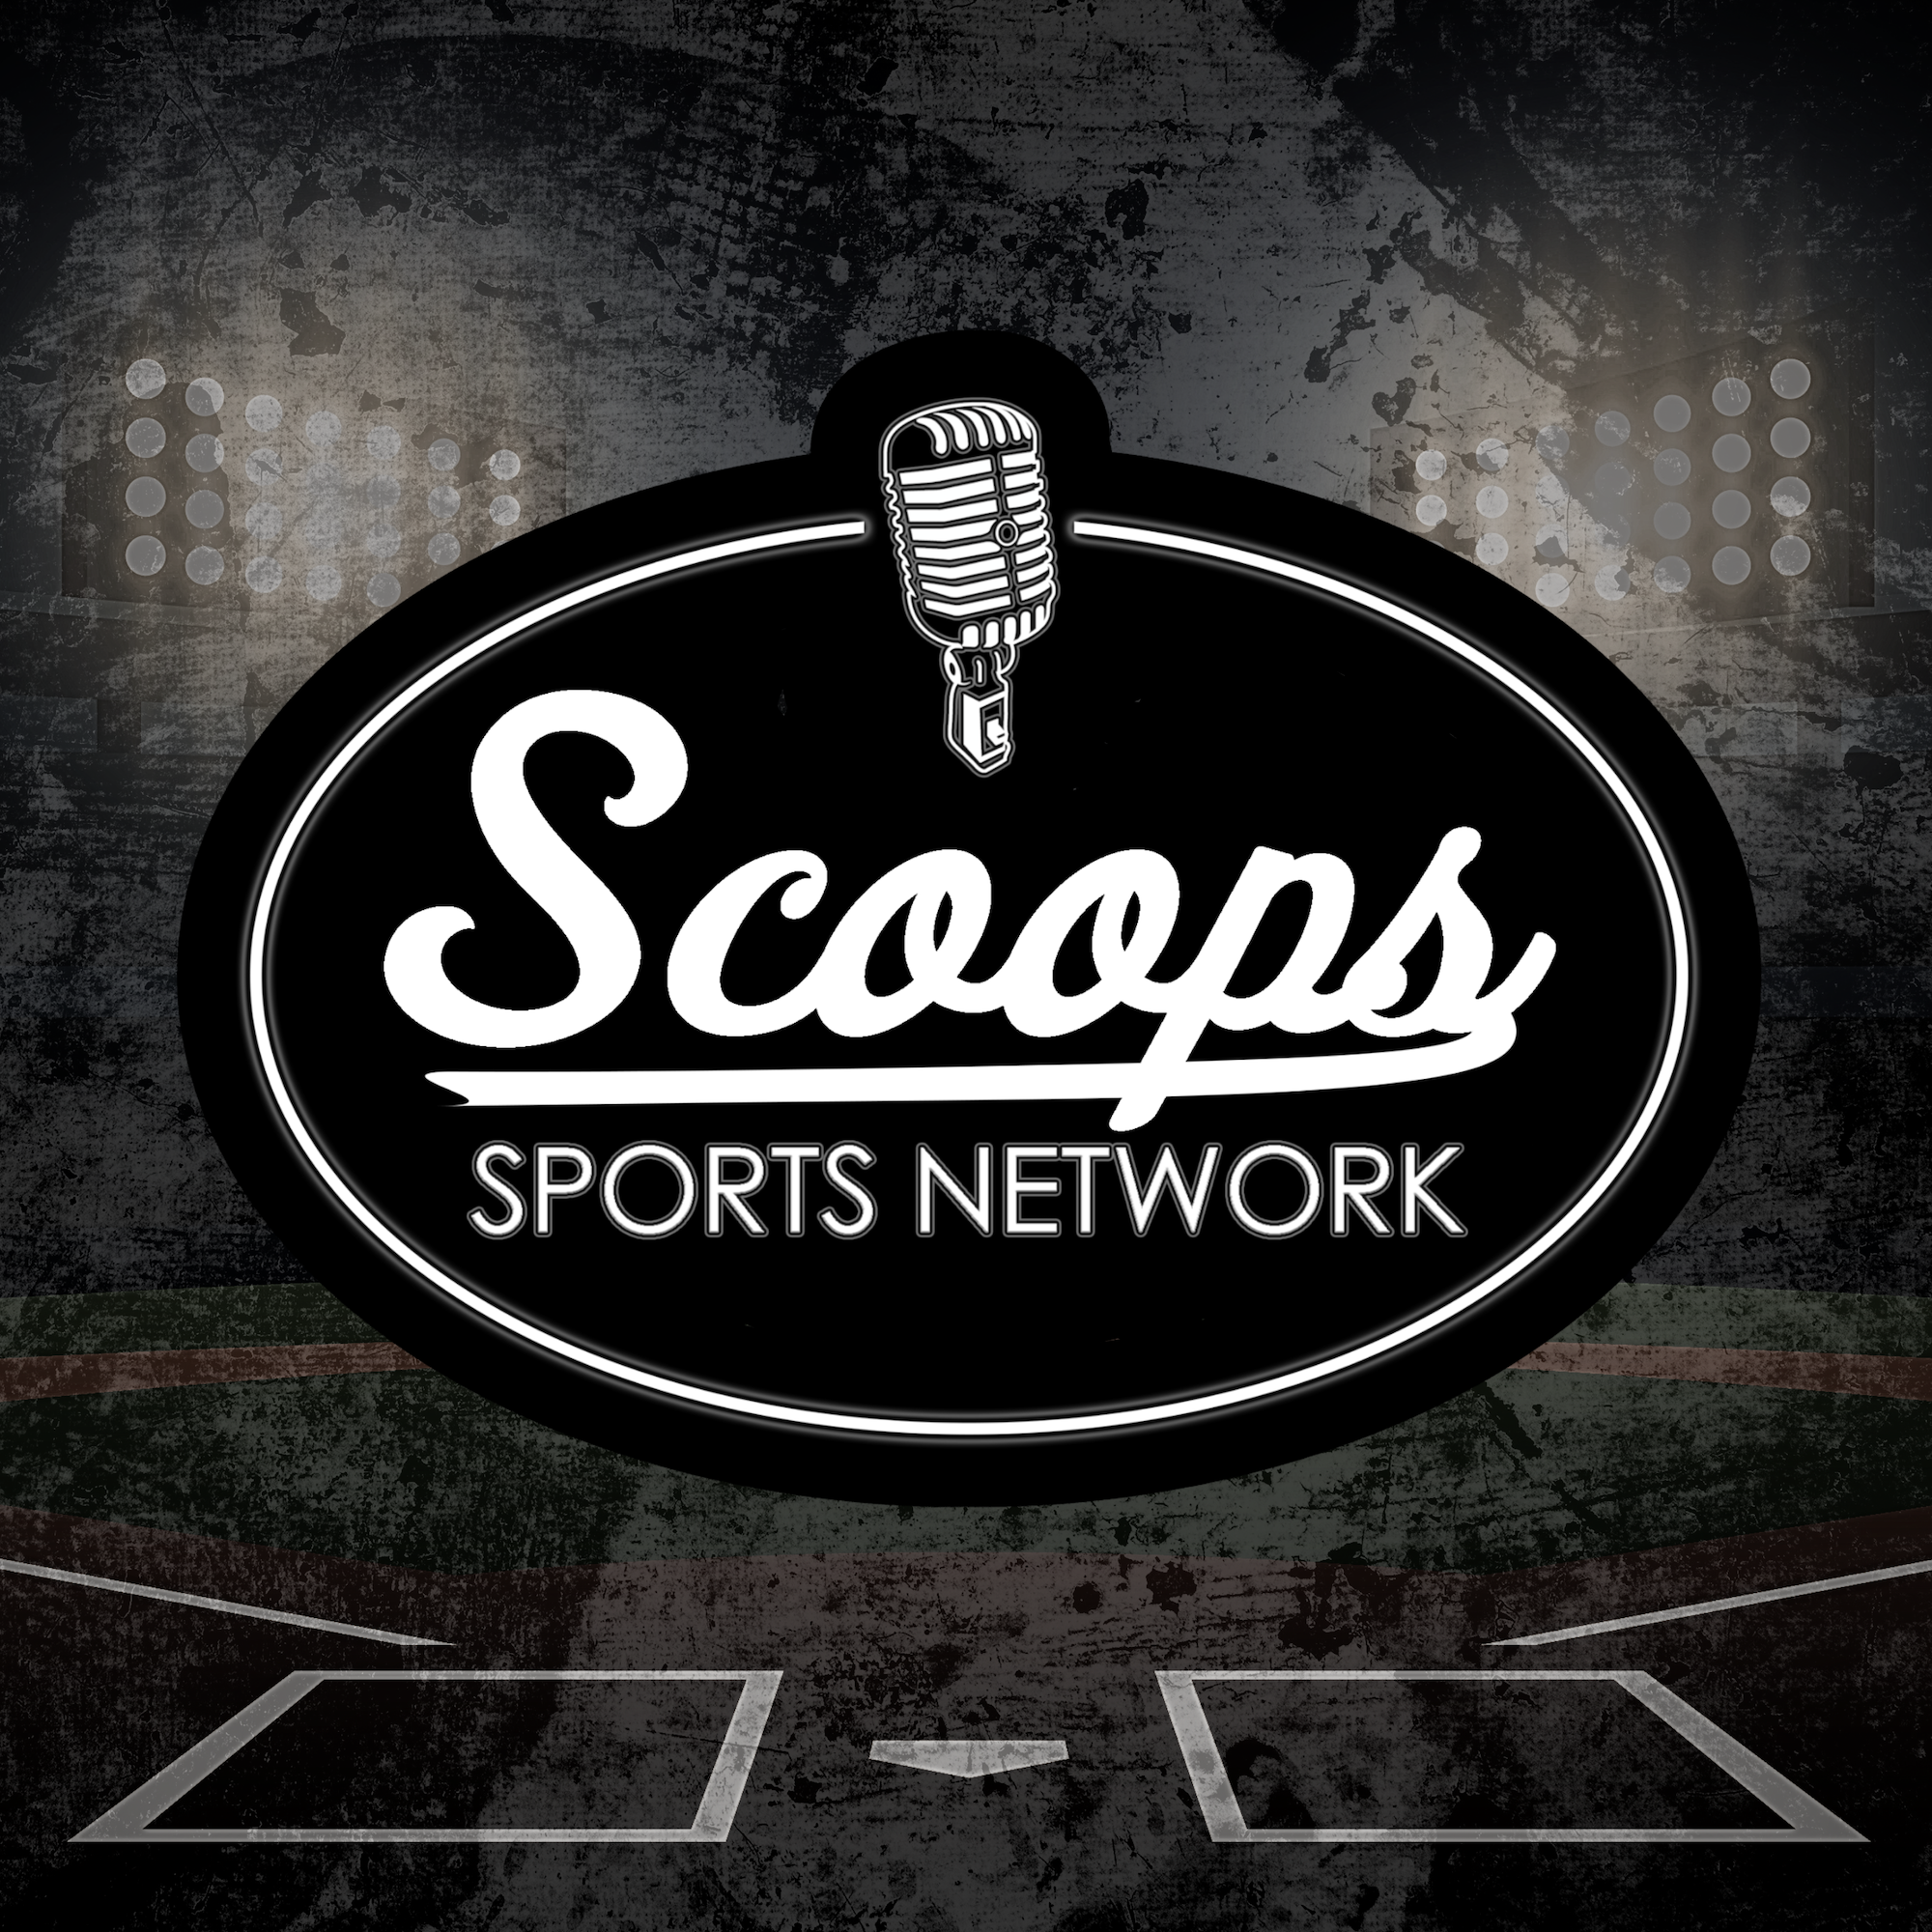 Scoops Sports Network